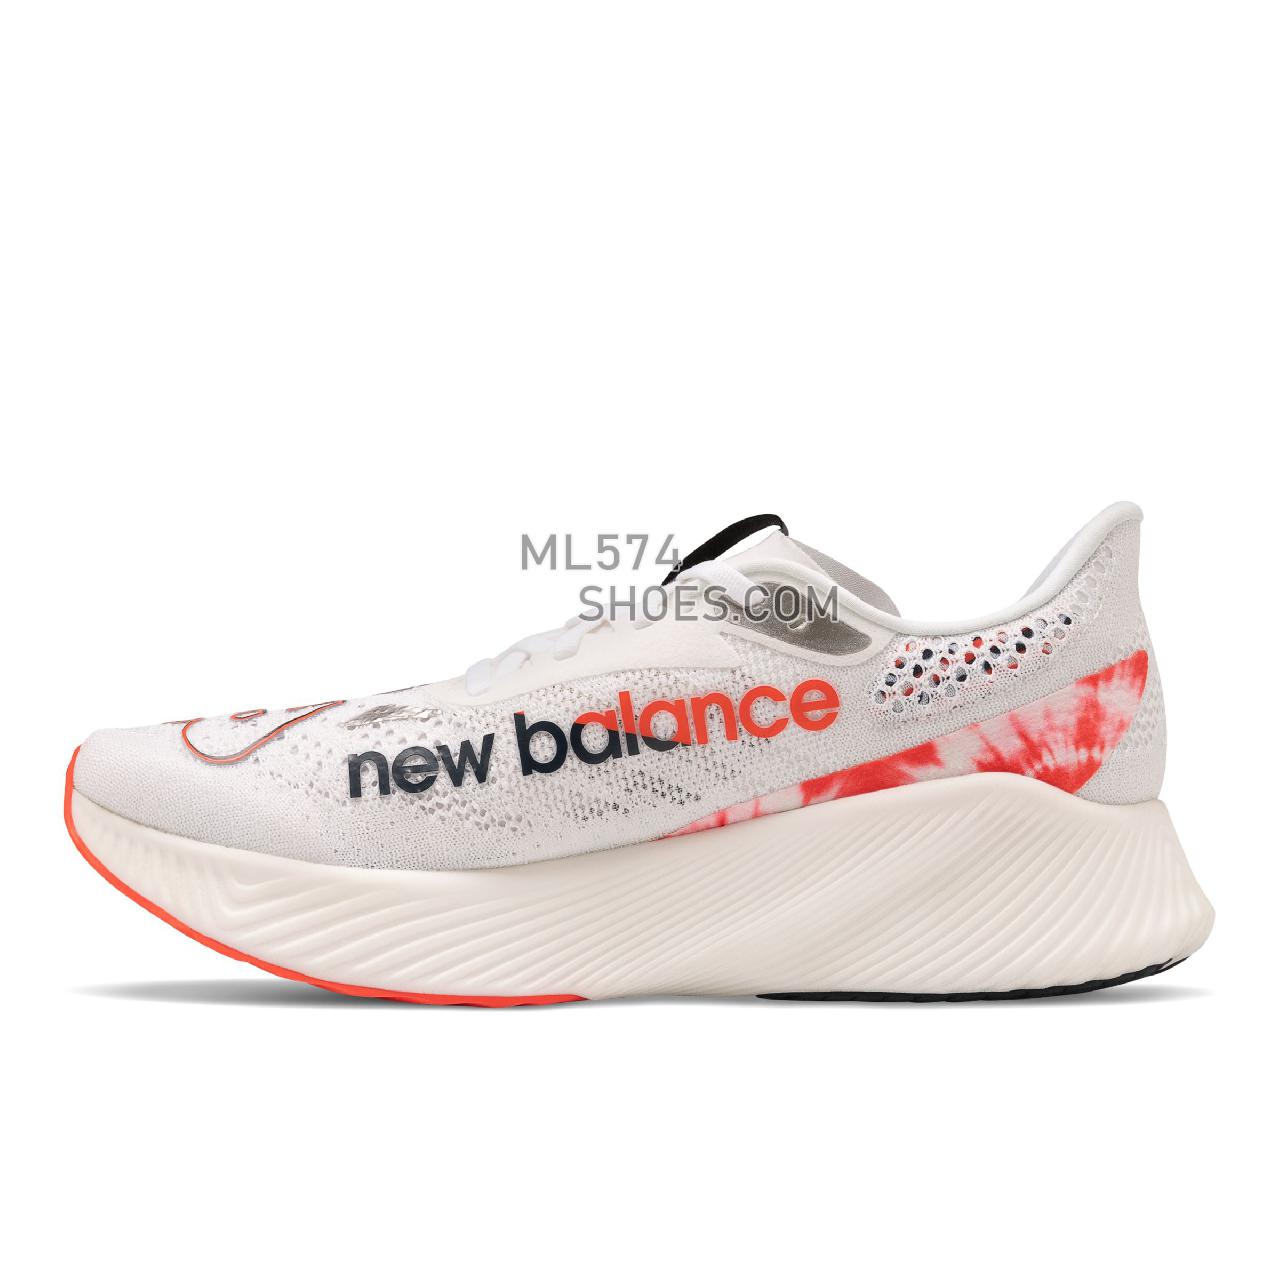 New Balance FuelCell RC Elite v2 - Men's Competition Running - White with Neo Flame - MRCELZ2